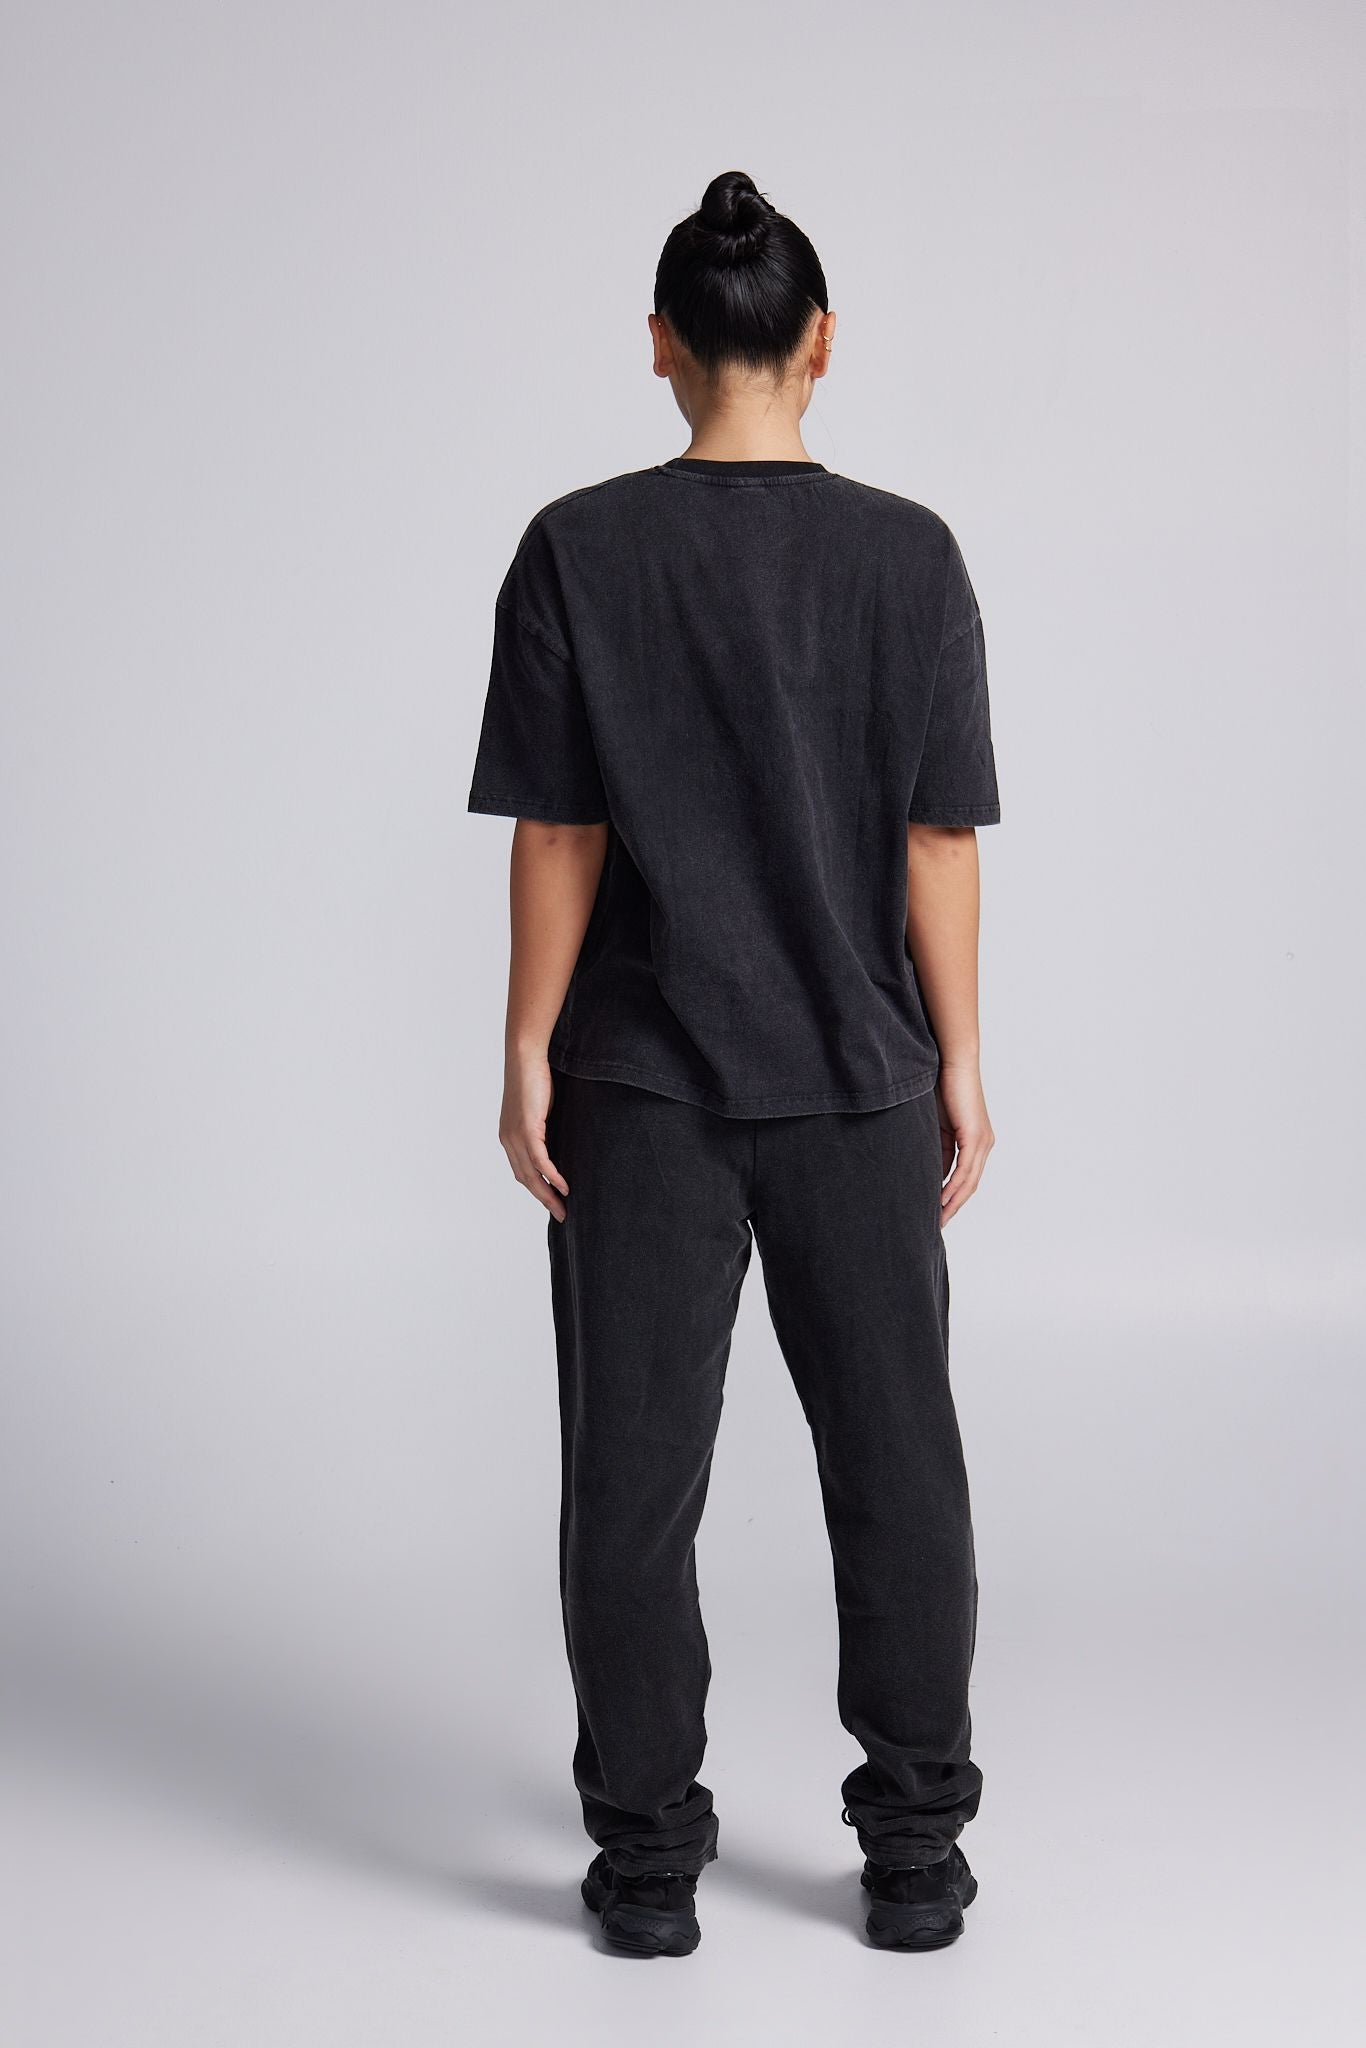 Charcoal Crew Neck Tee - Remmie By Riley